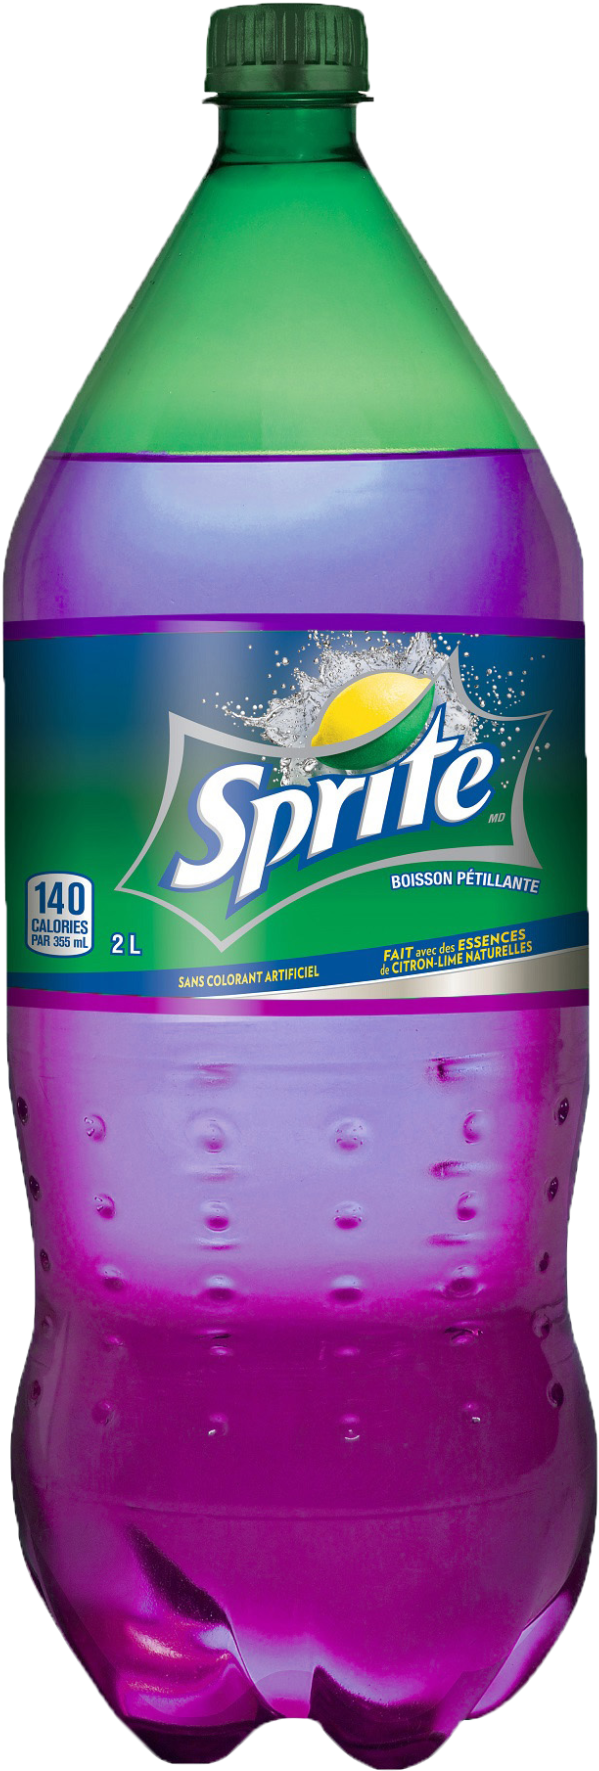 A Bottle Of Soda With A Purple Label